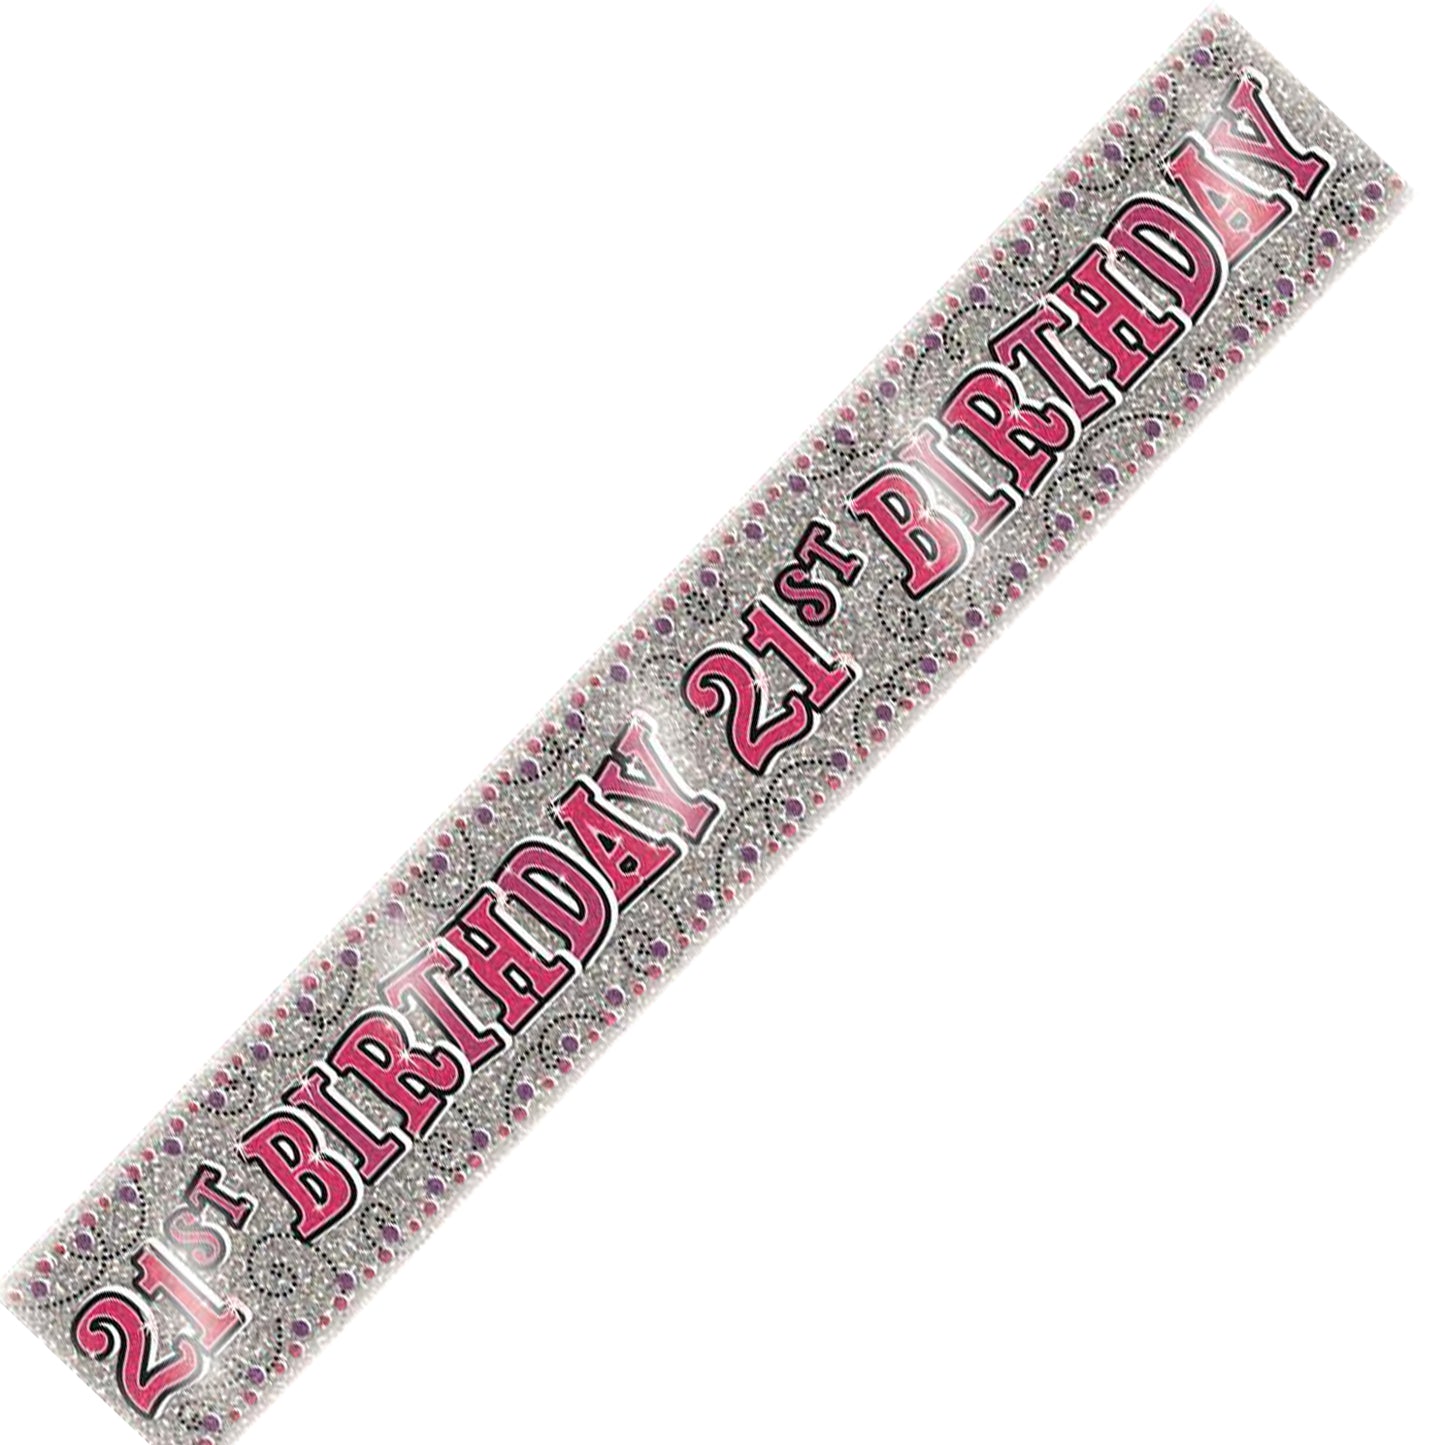 Age 21 Birthday Banner Pink And Silver Star Holographic Recyclable 21st Birthday Party Banner